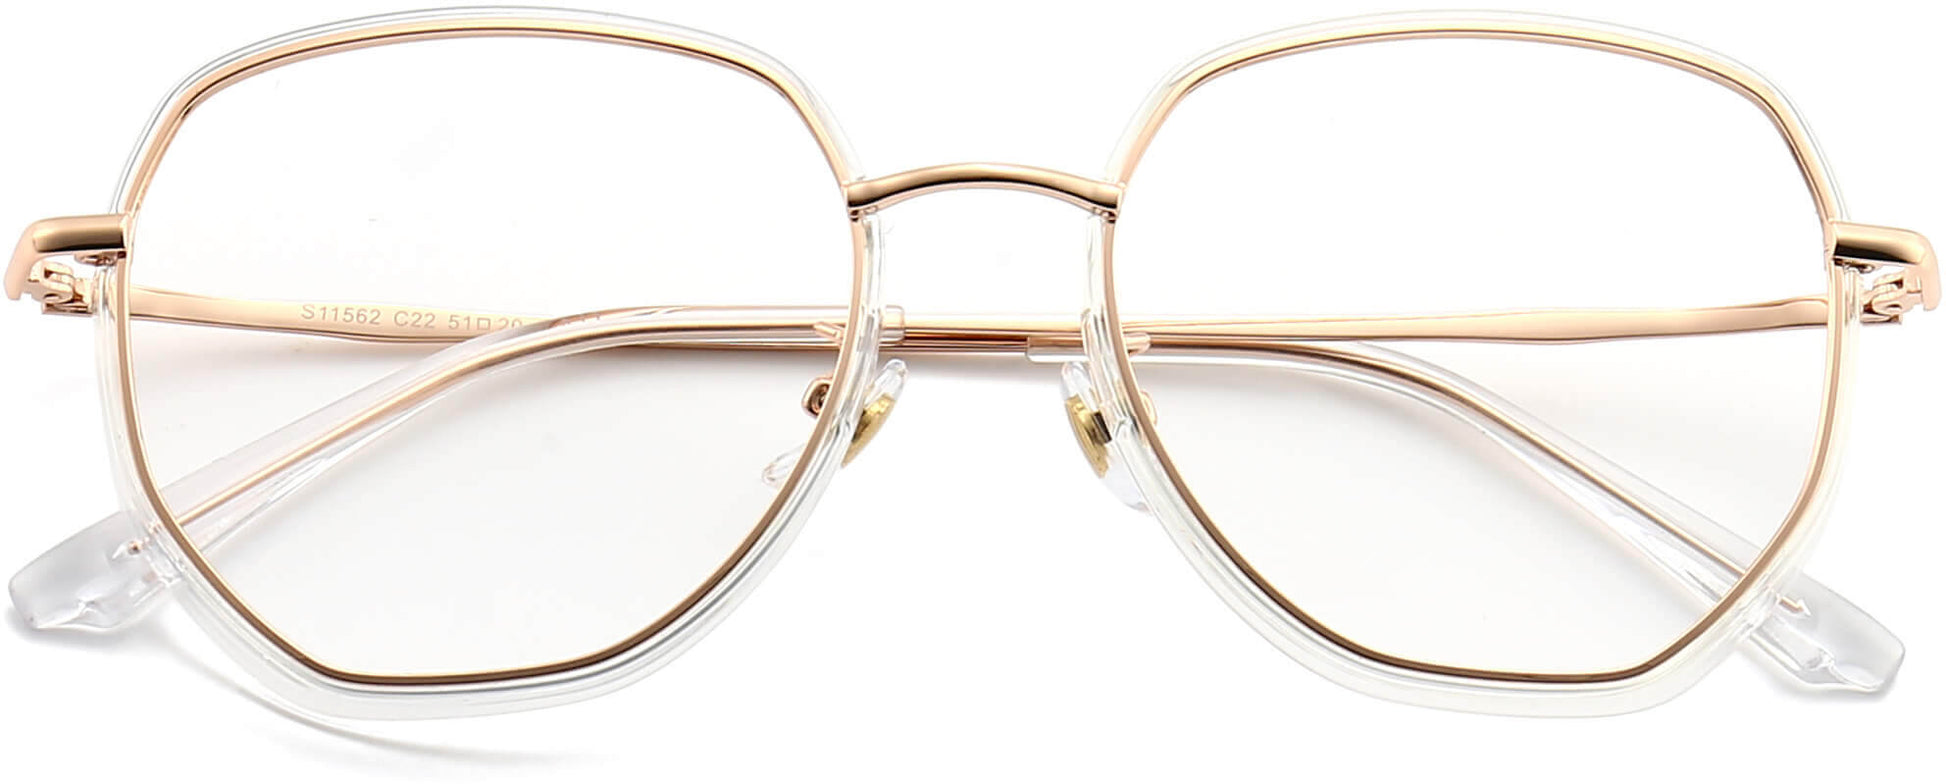 Riley Geometric Gold Eyeglasses from ANRRI, closed view